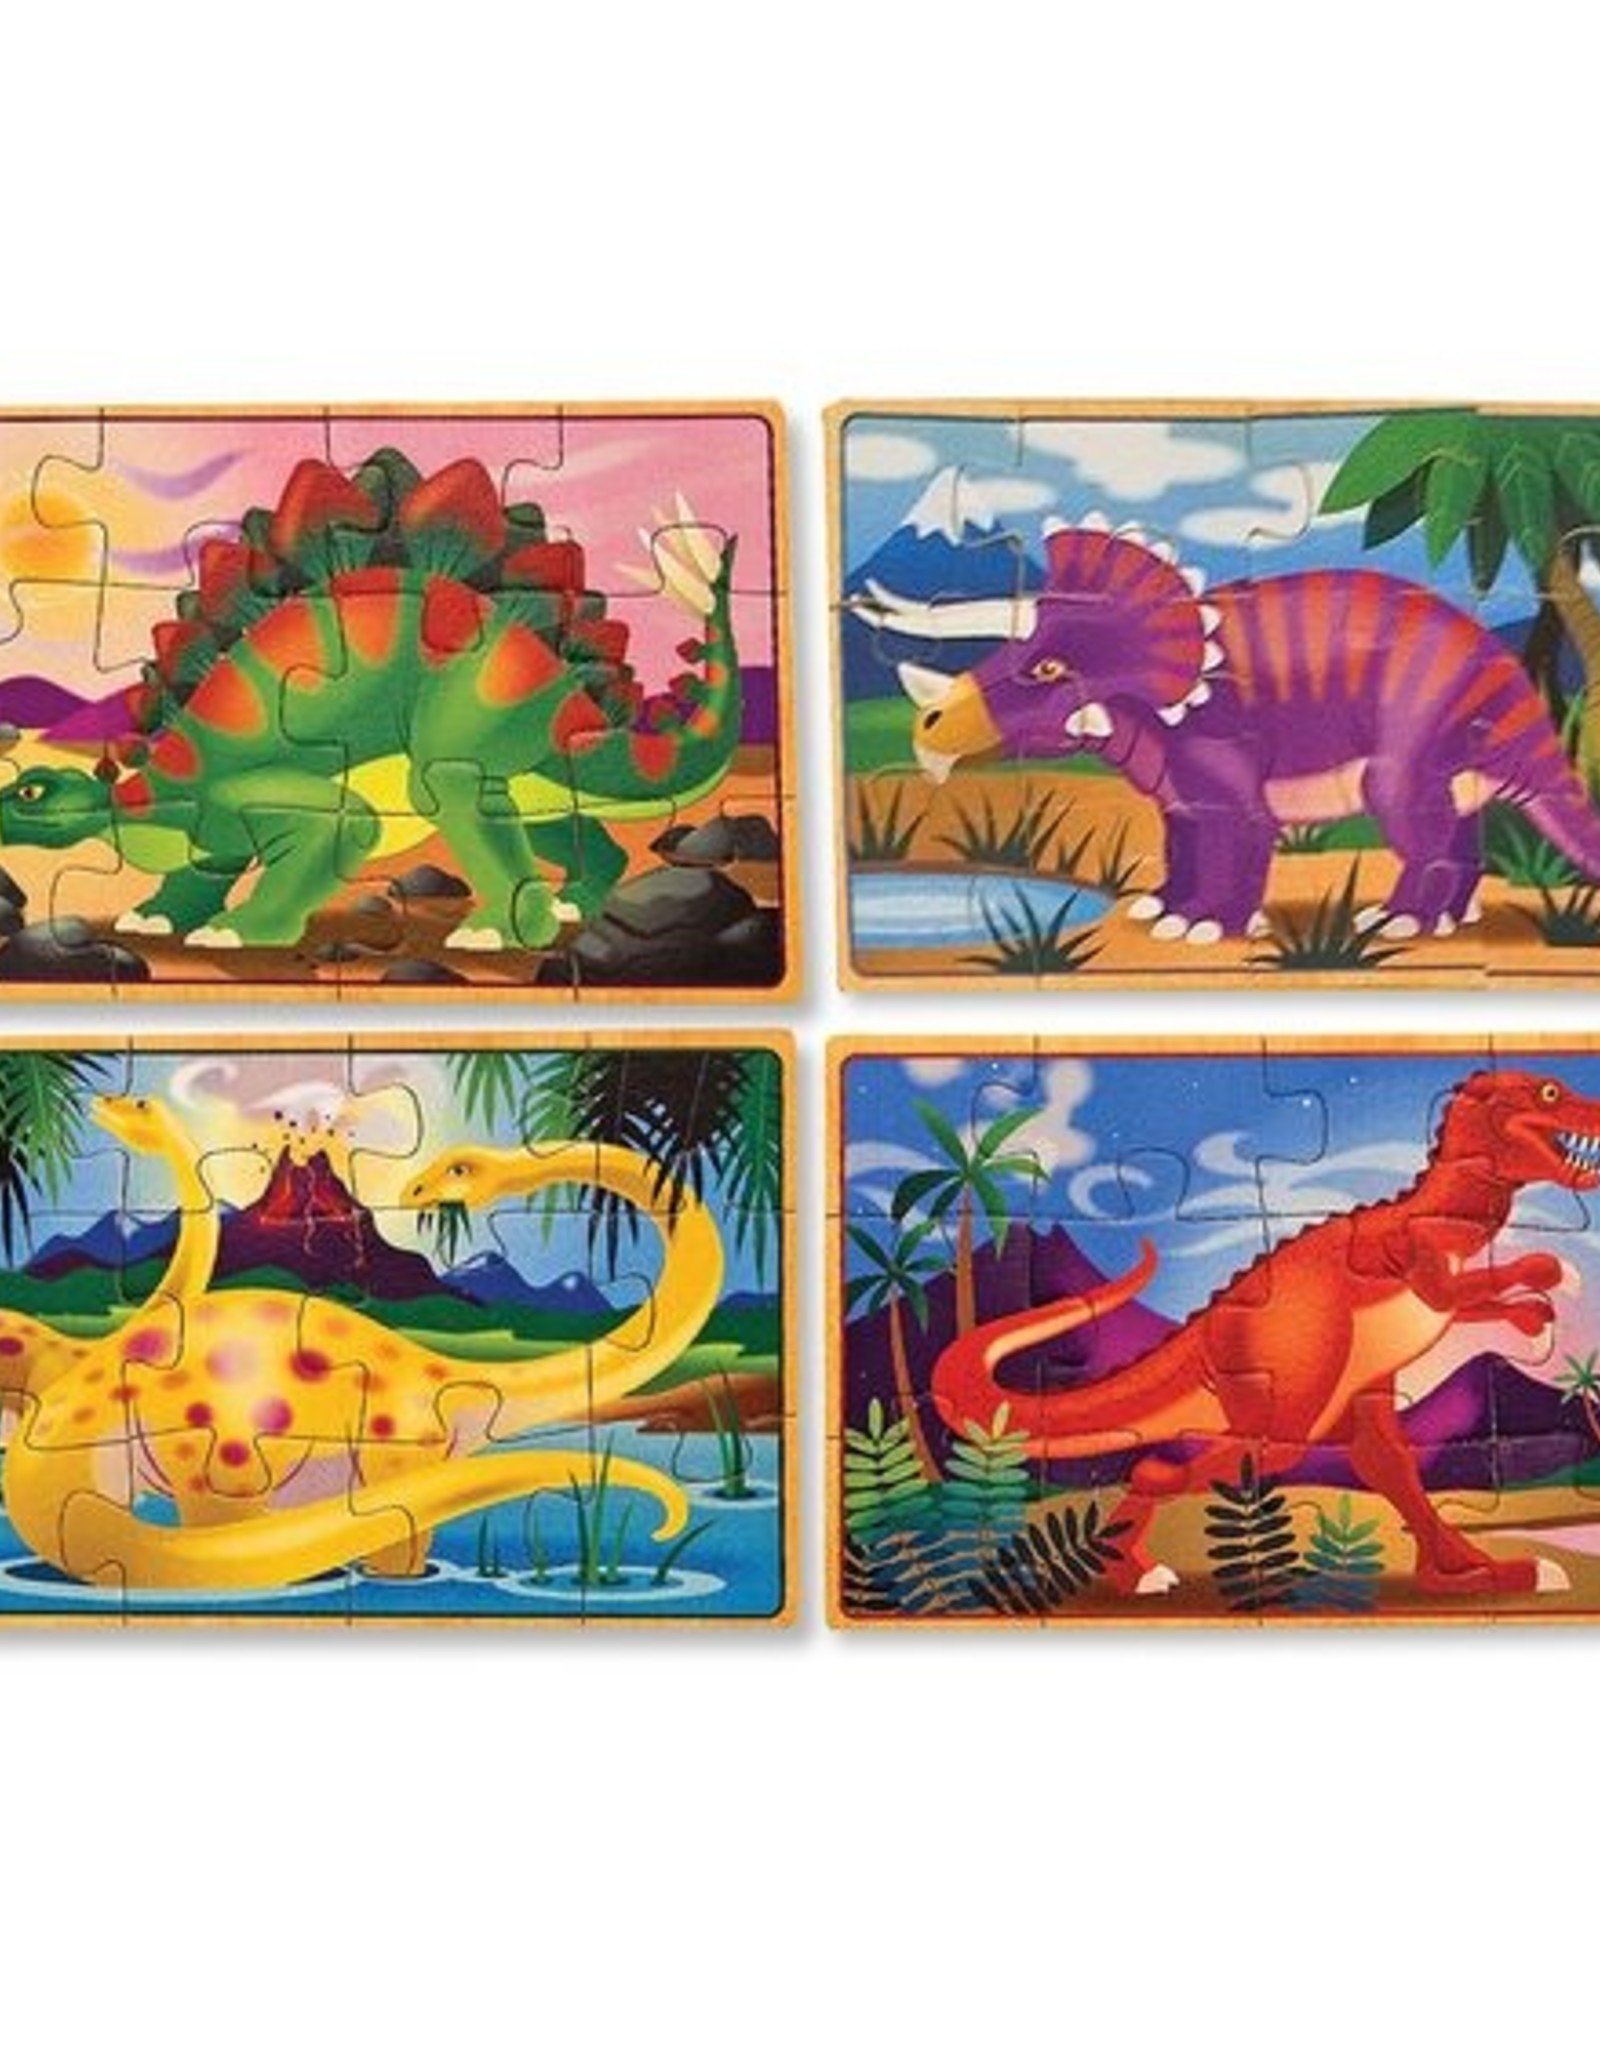 Melissa & Doug Dinosaurs Puzzles in a Box